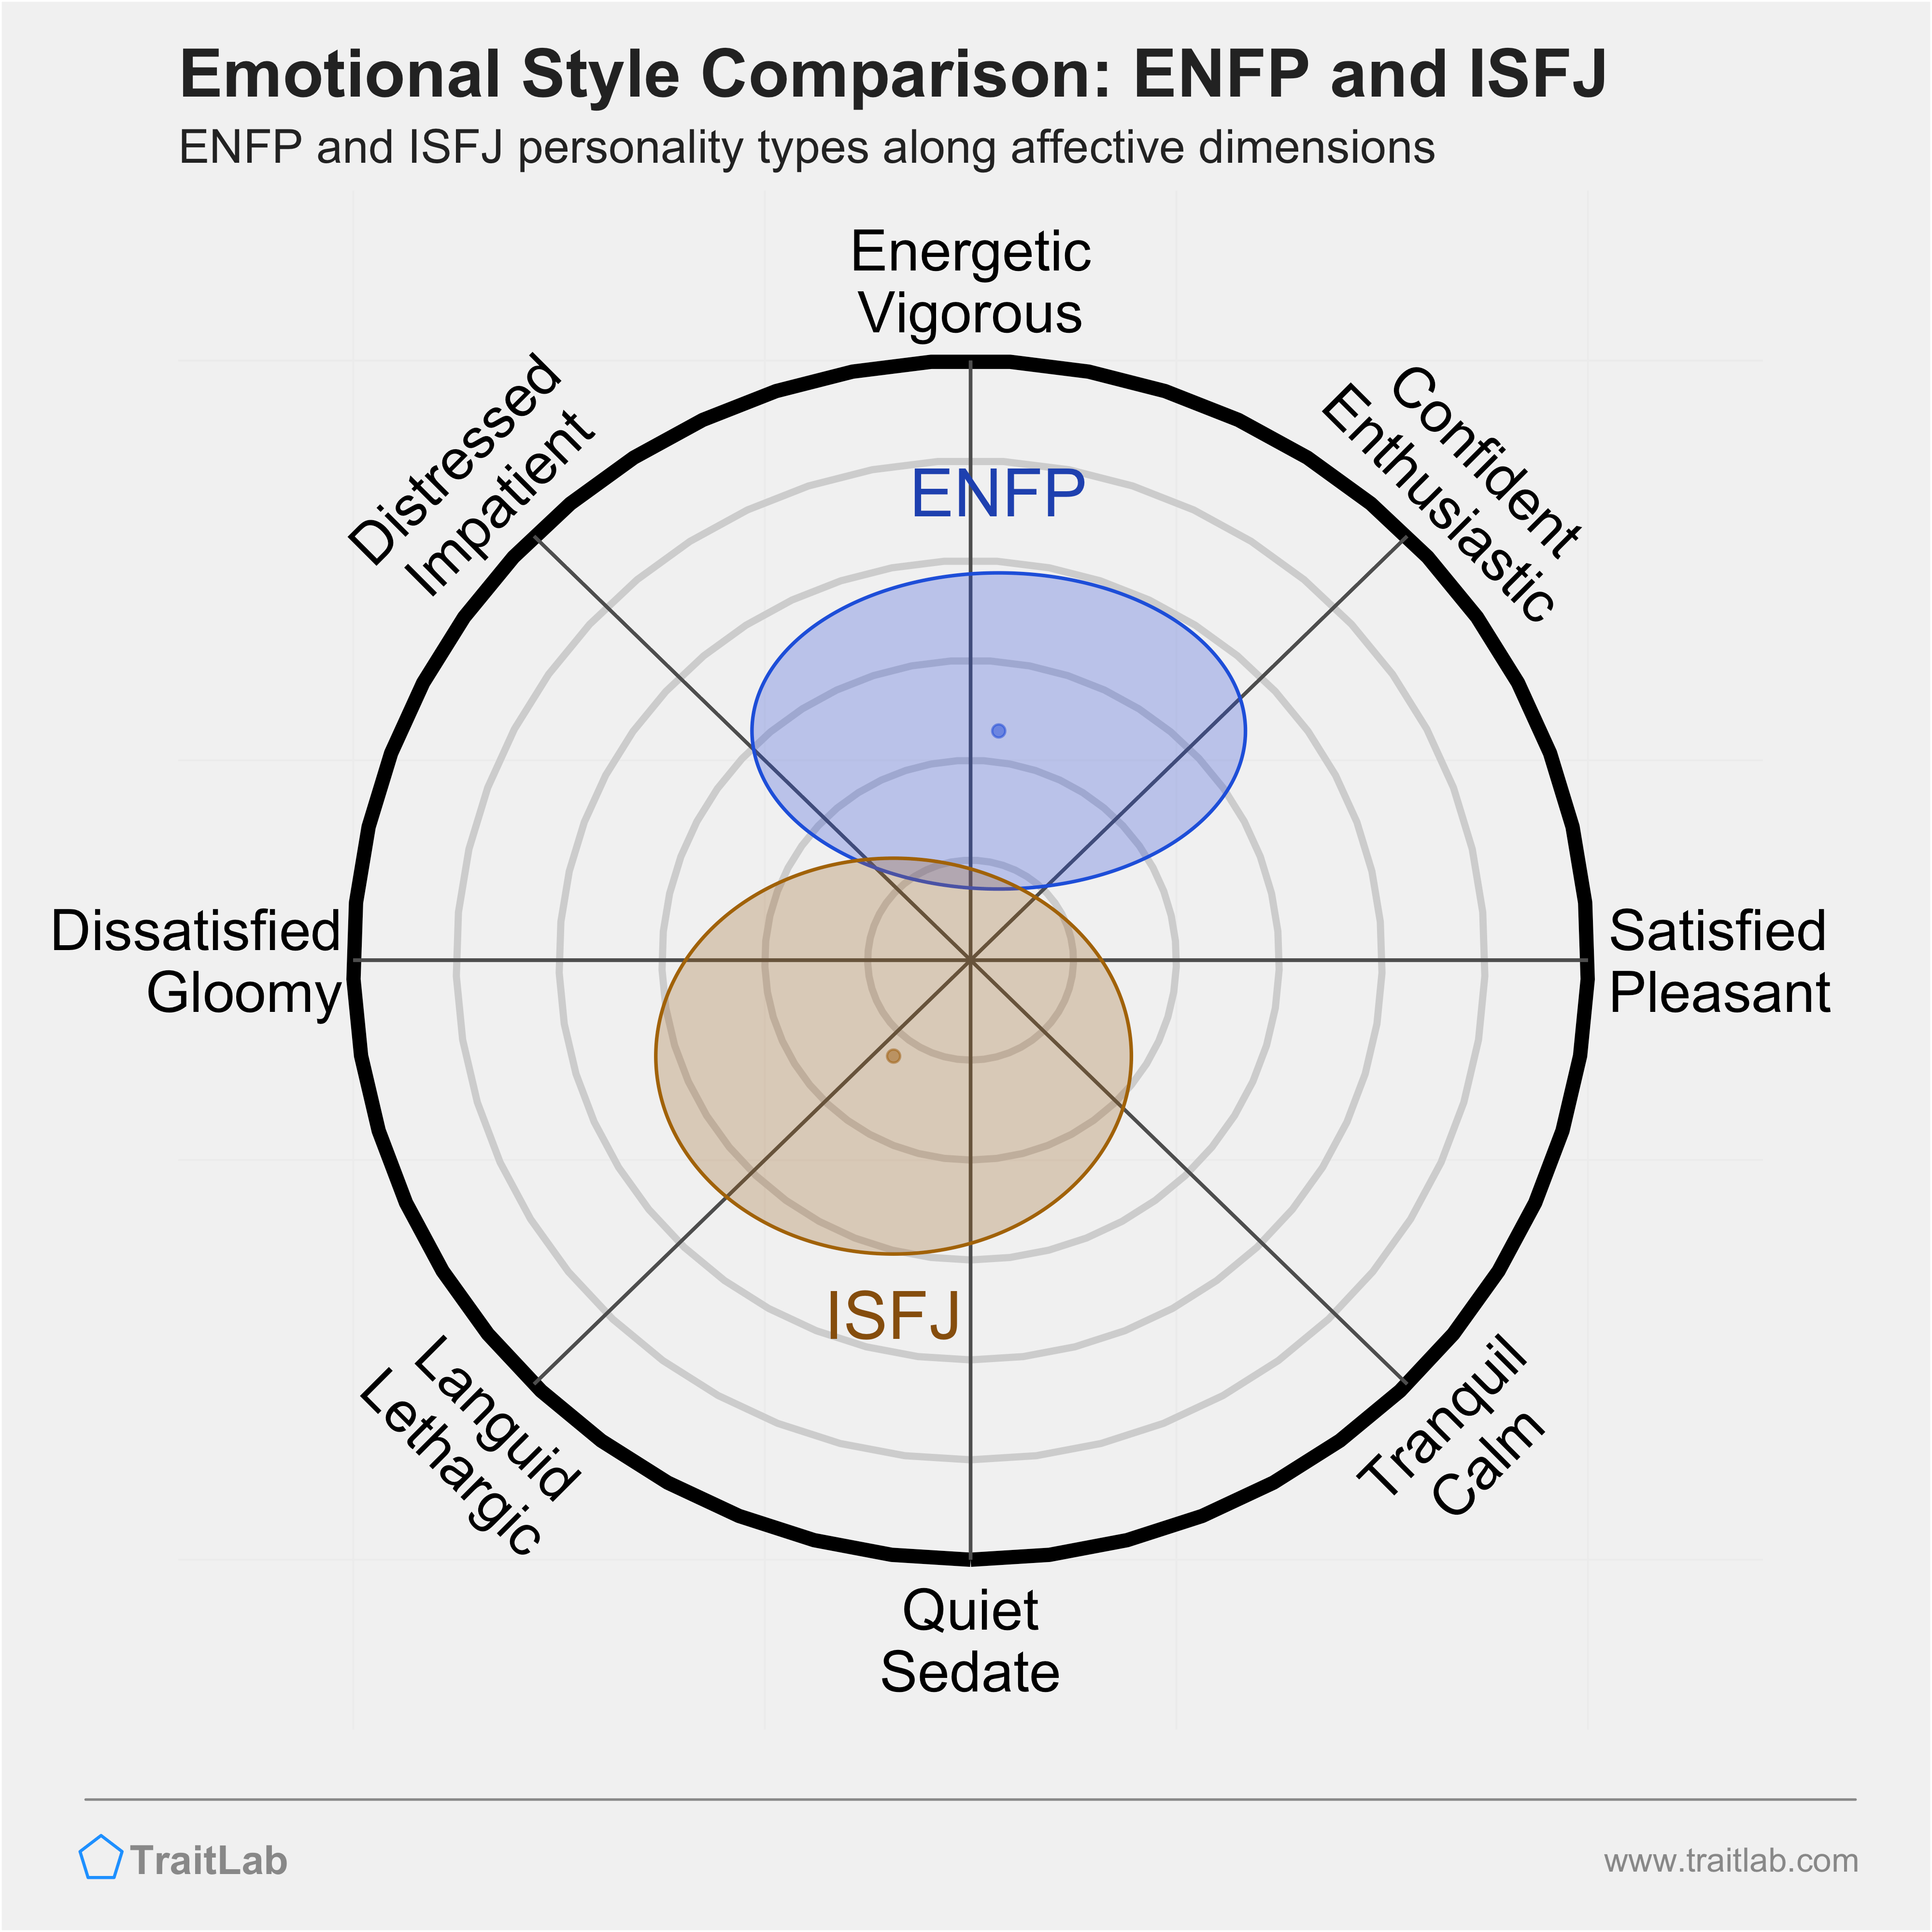 ENFP and ISFJ comparison across emotional (affective) dimensions